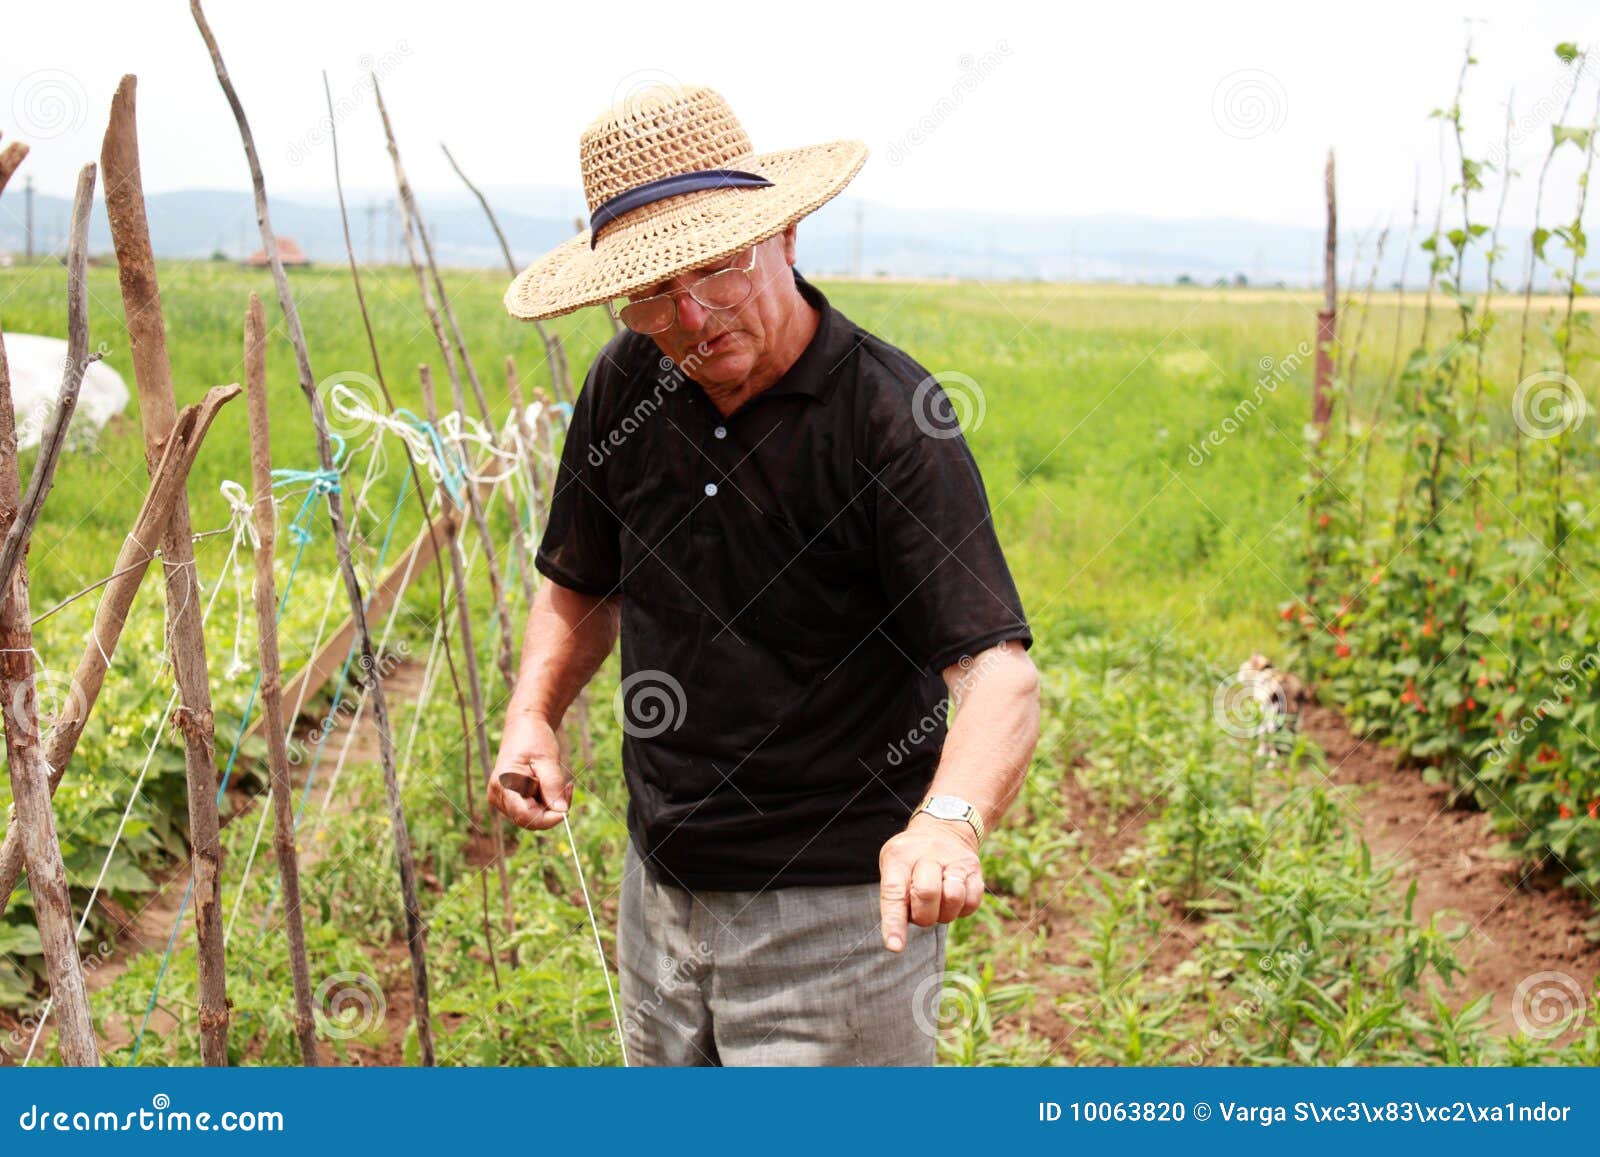 old farmer man explains how to cultivate